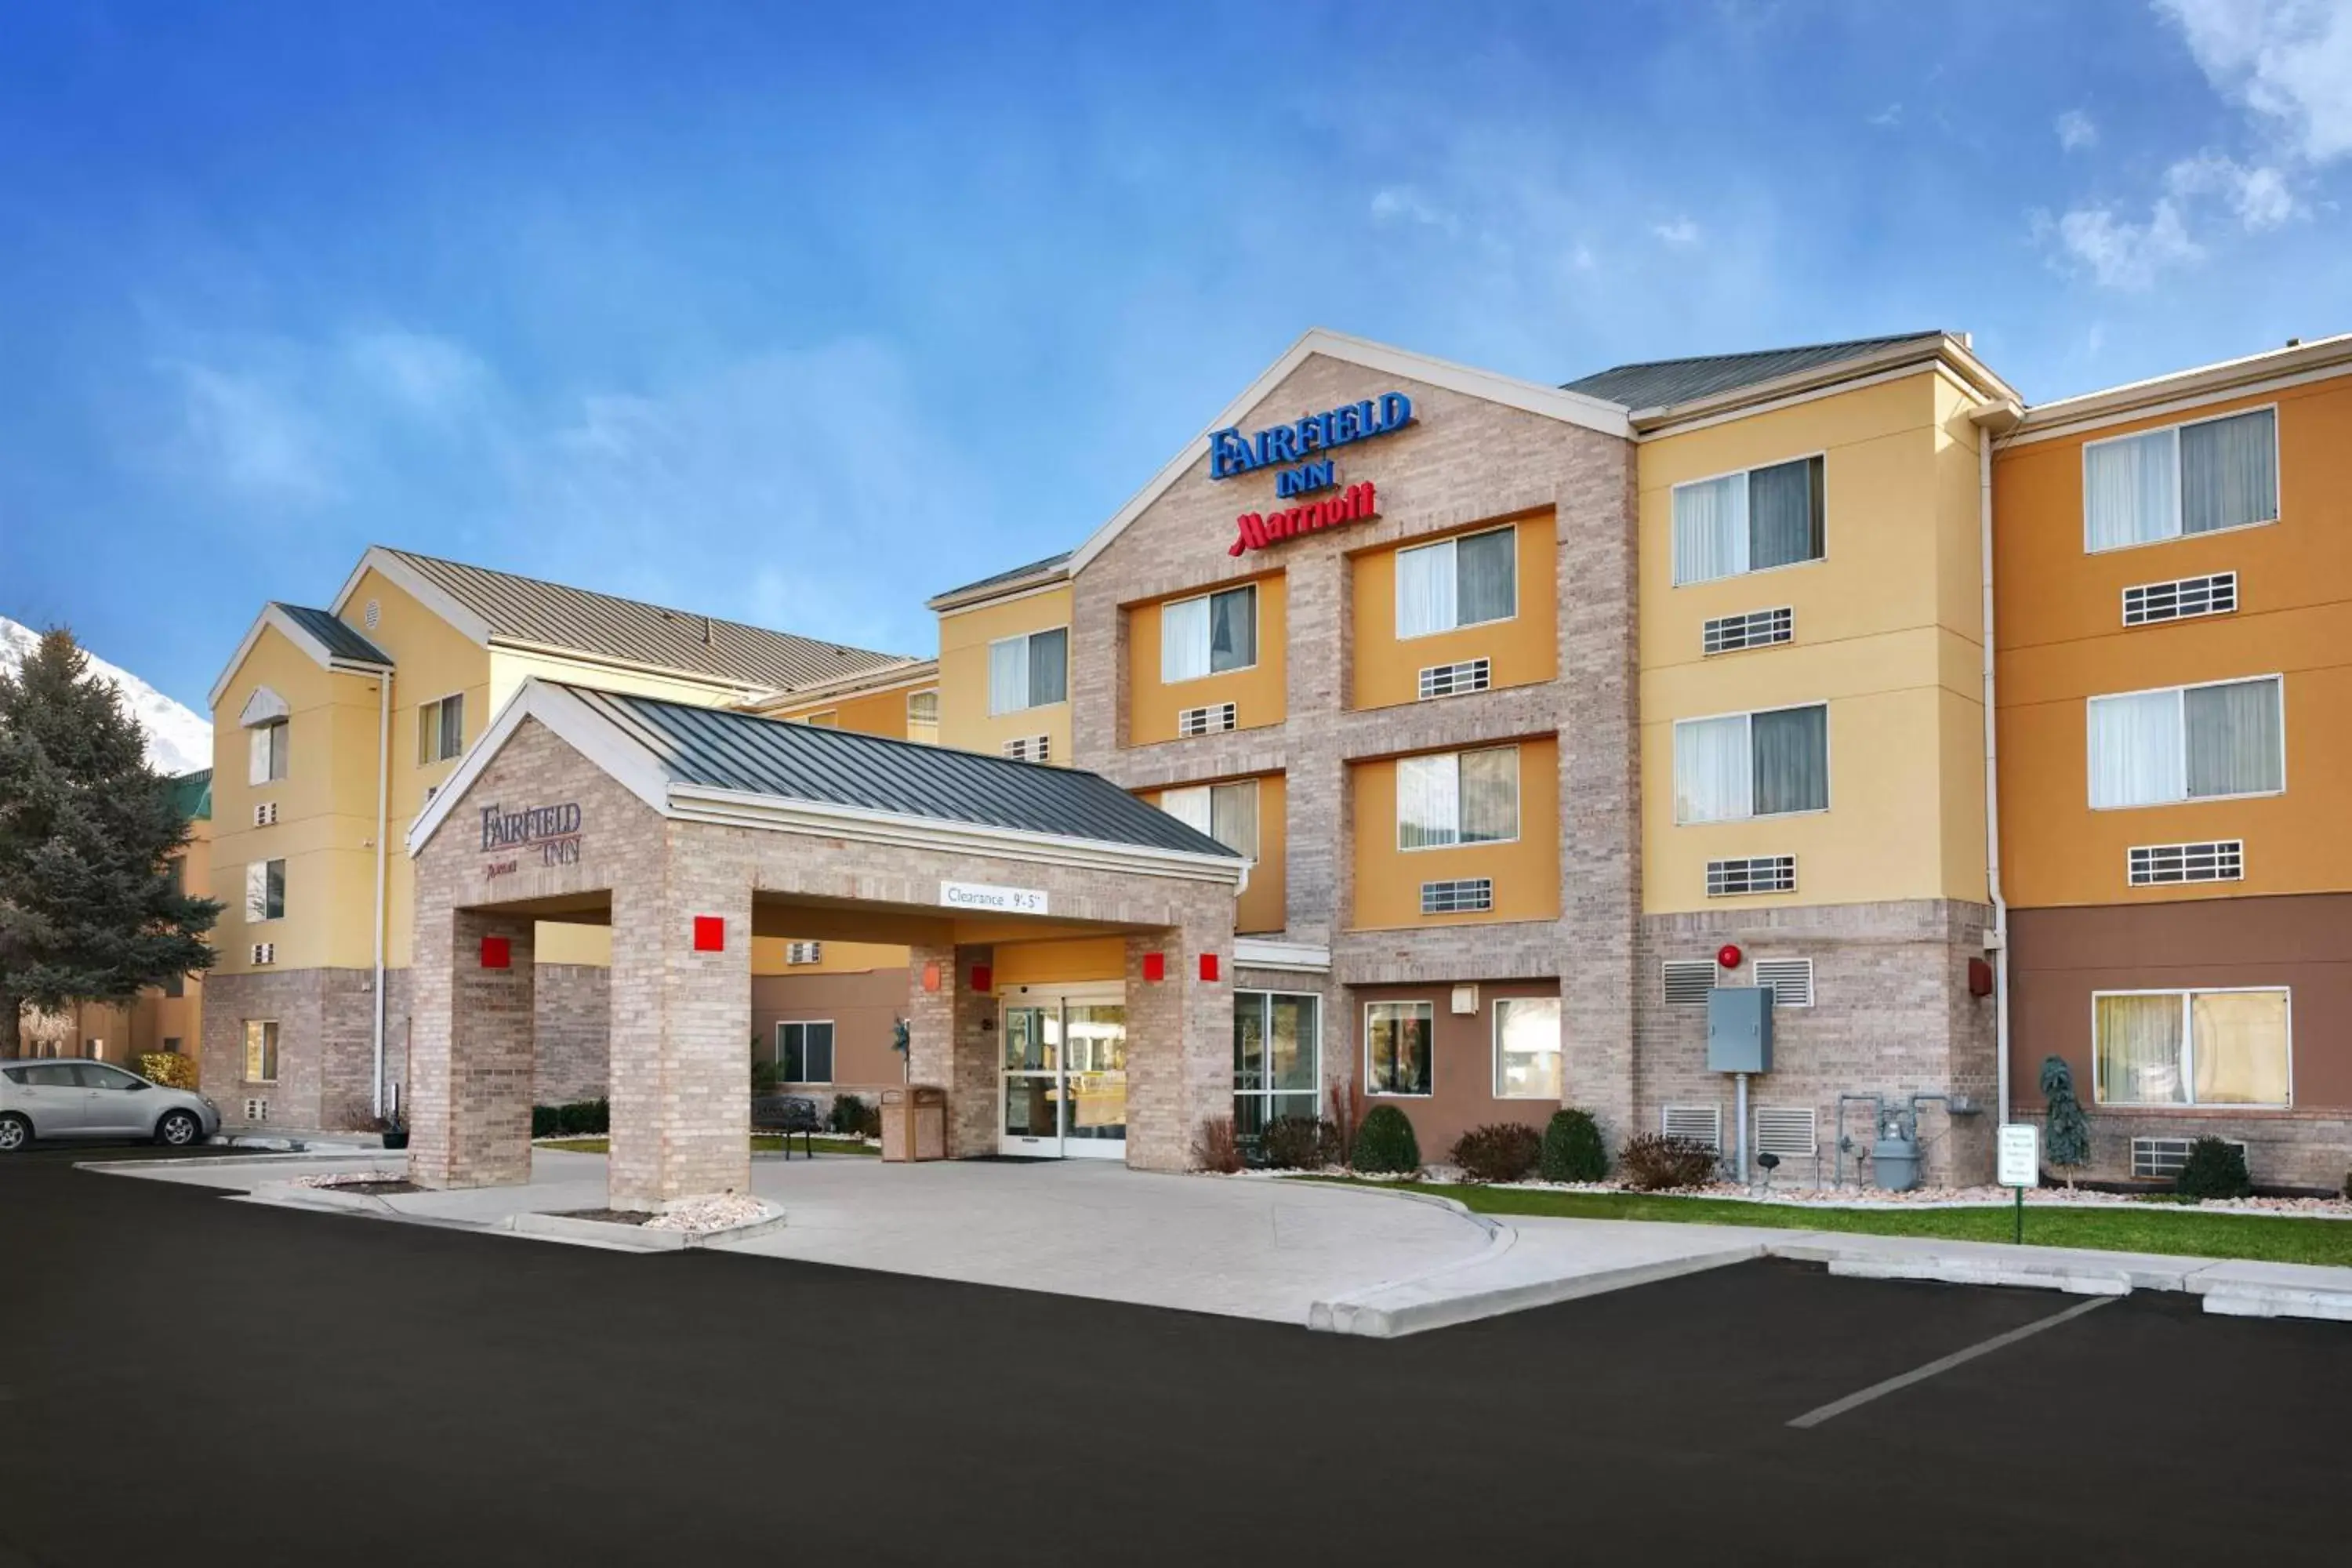 Property Building in Fairfield Inn by Marriott Provo